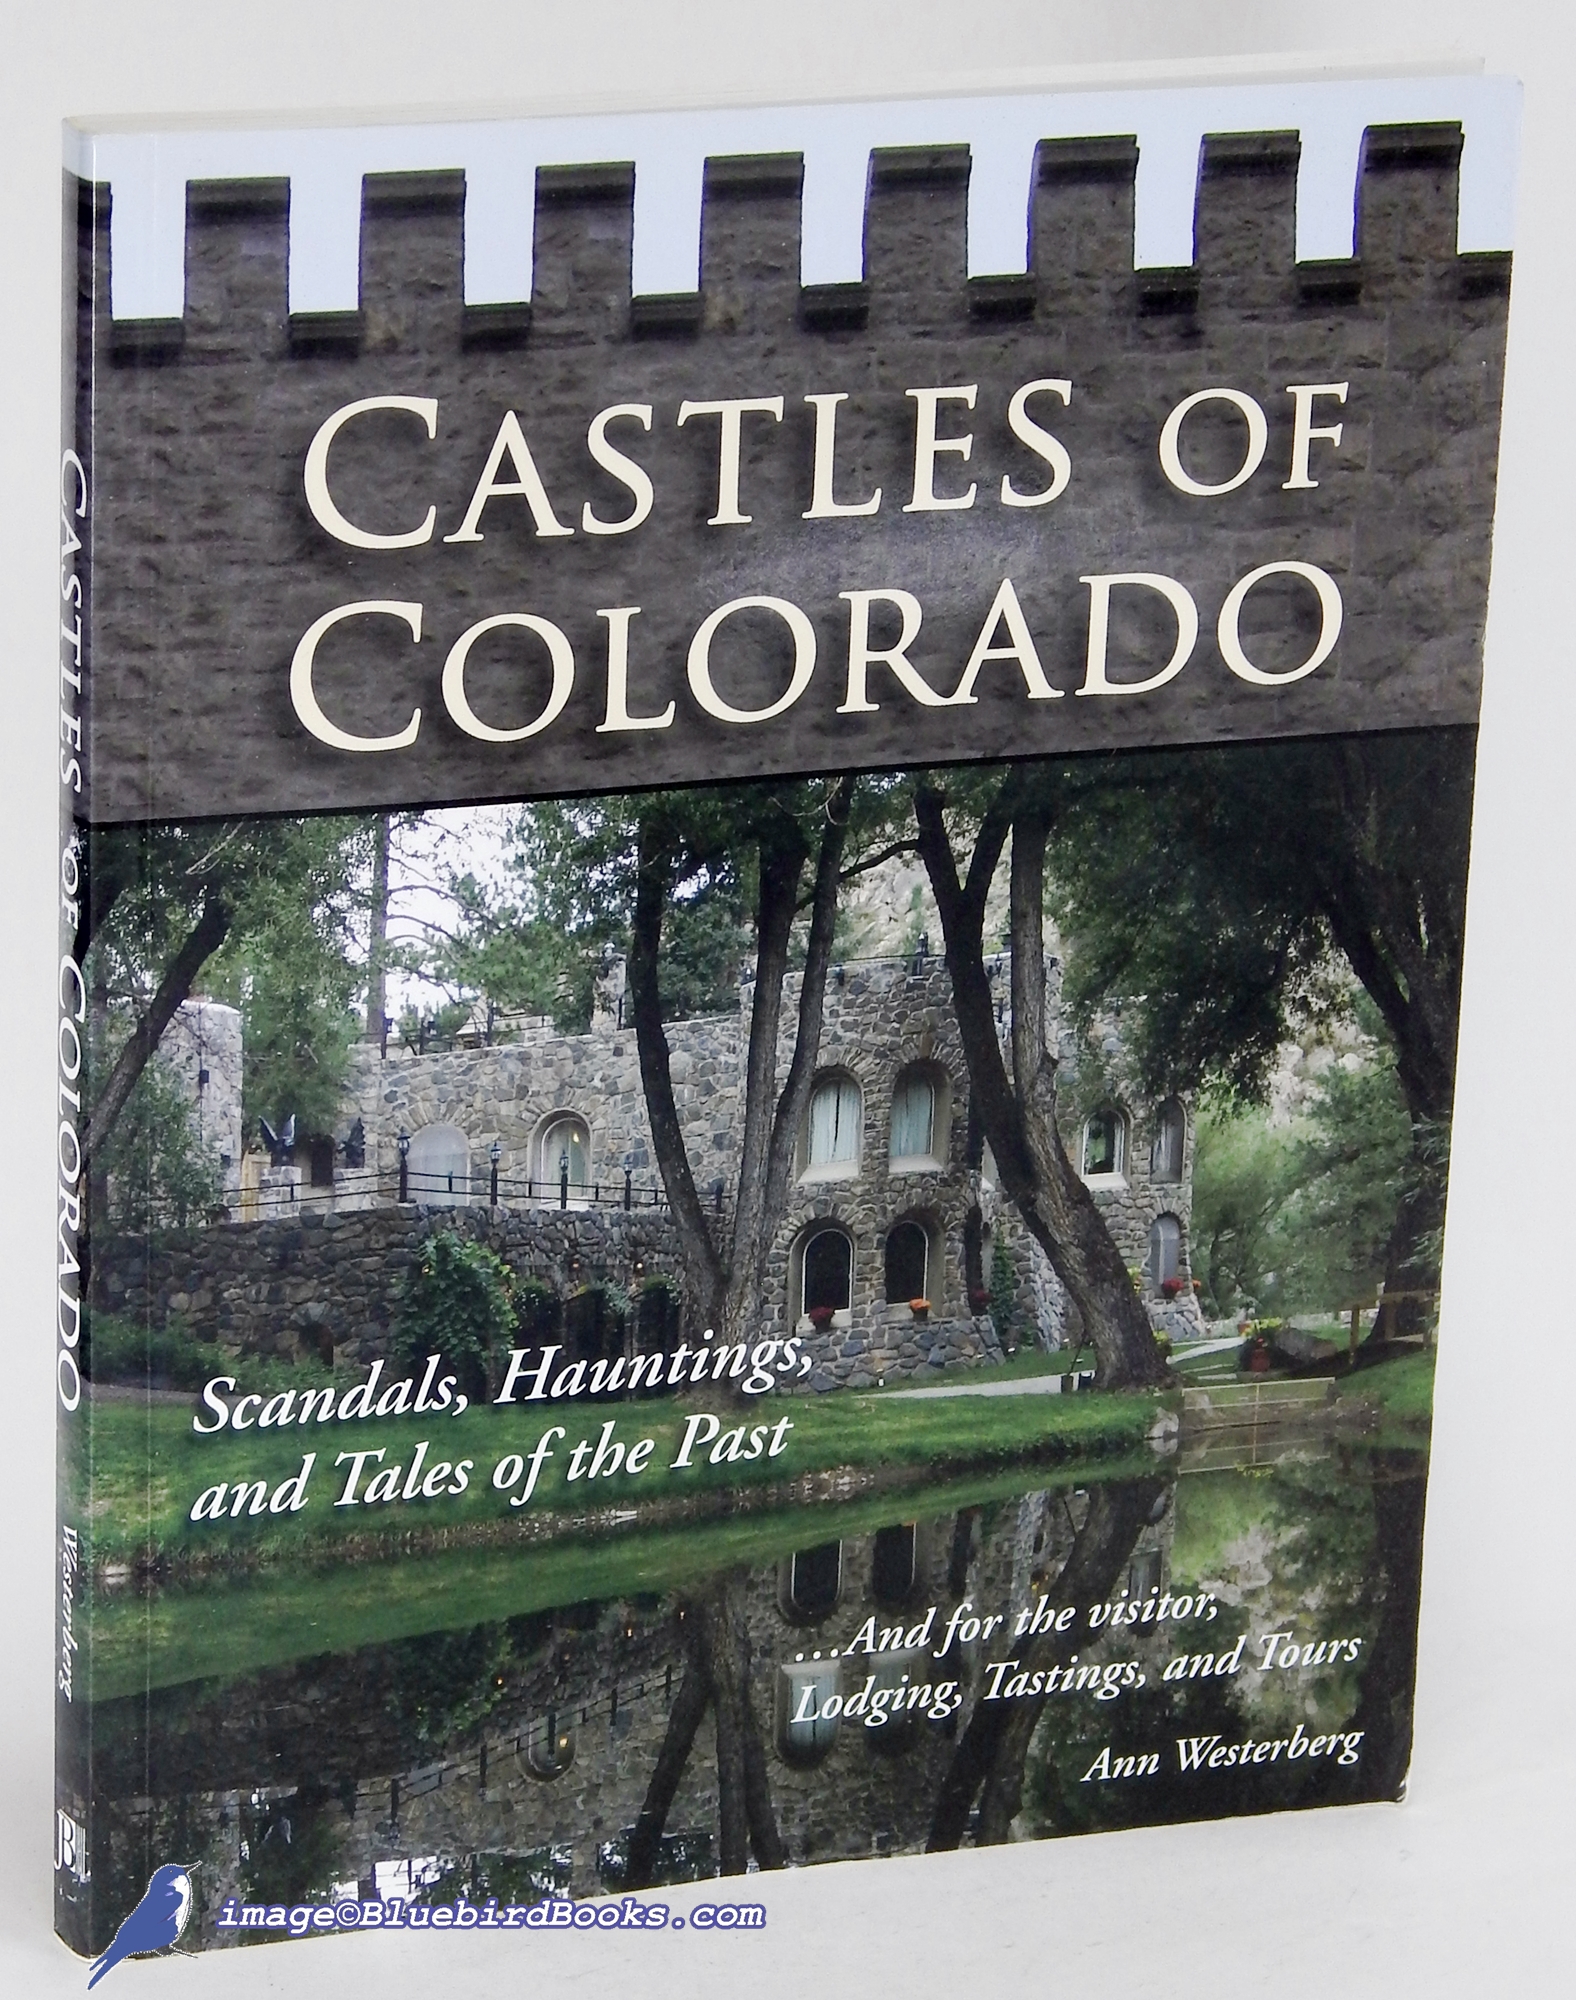 WESTERBERG, ANN - Castles of Colorado: Scandals, Hauntings and Tales of the Past... And for the Visitor, Lodging, Tastings and Tours